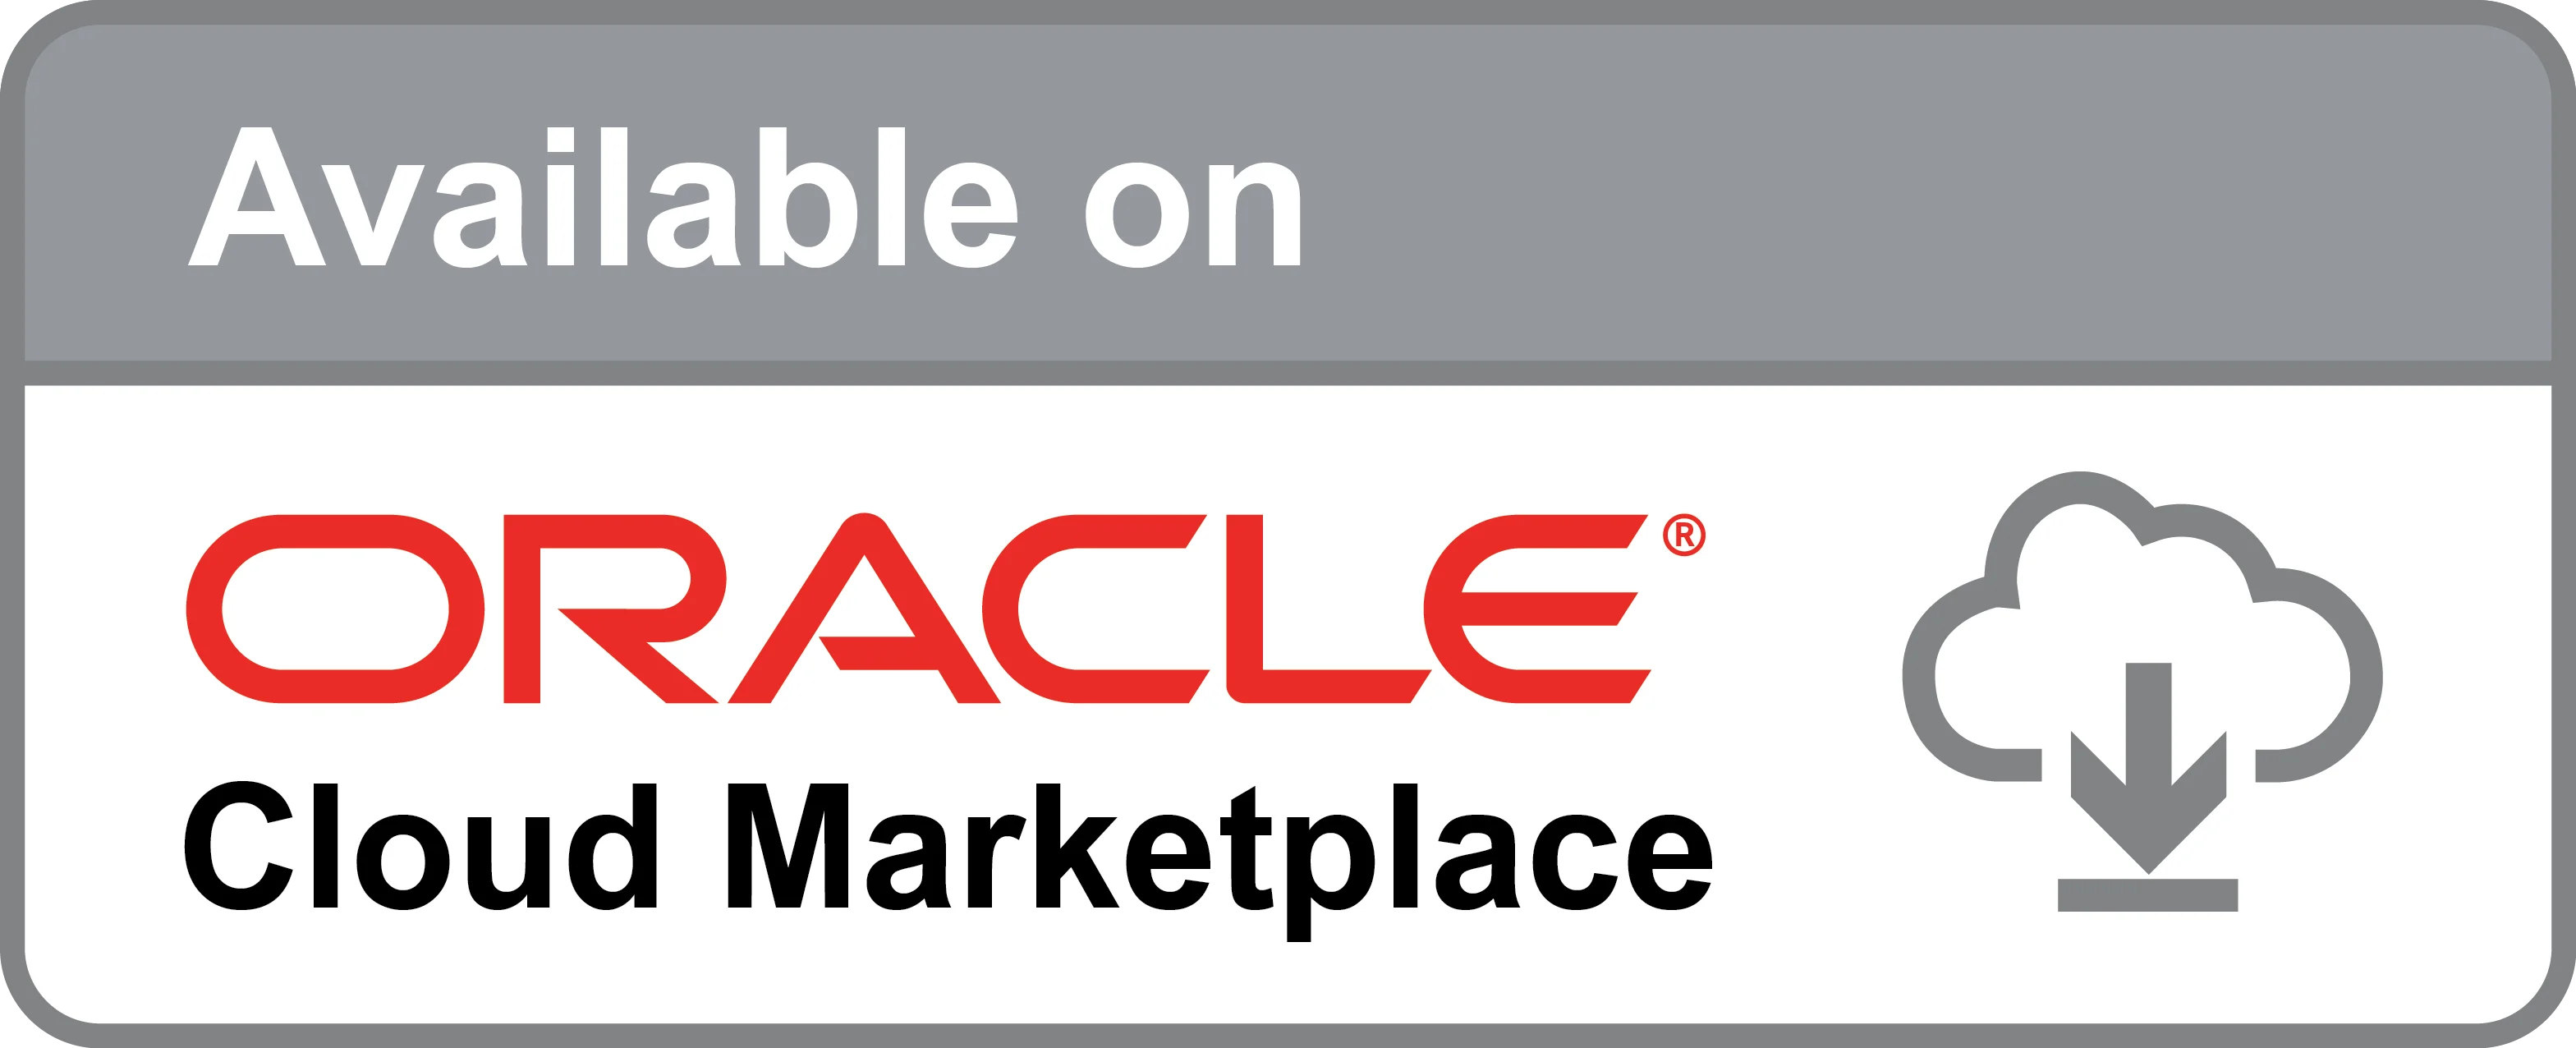 Arcivate Mi Invoices available on the Oracle Cloud Marketplace